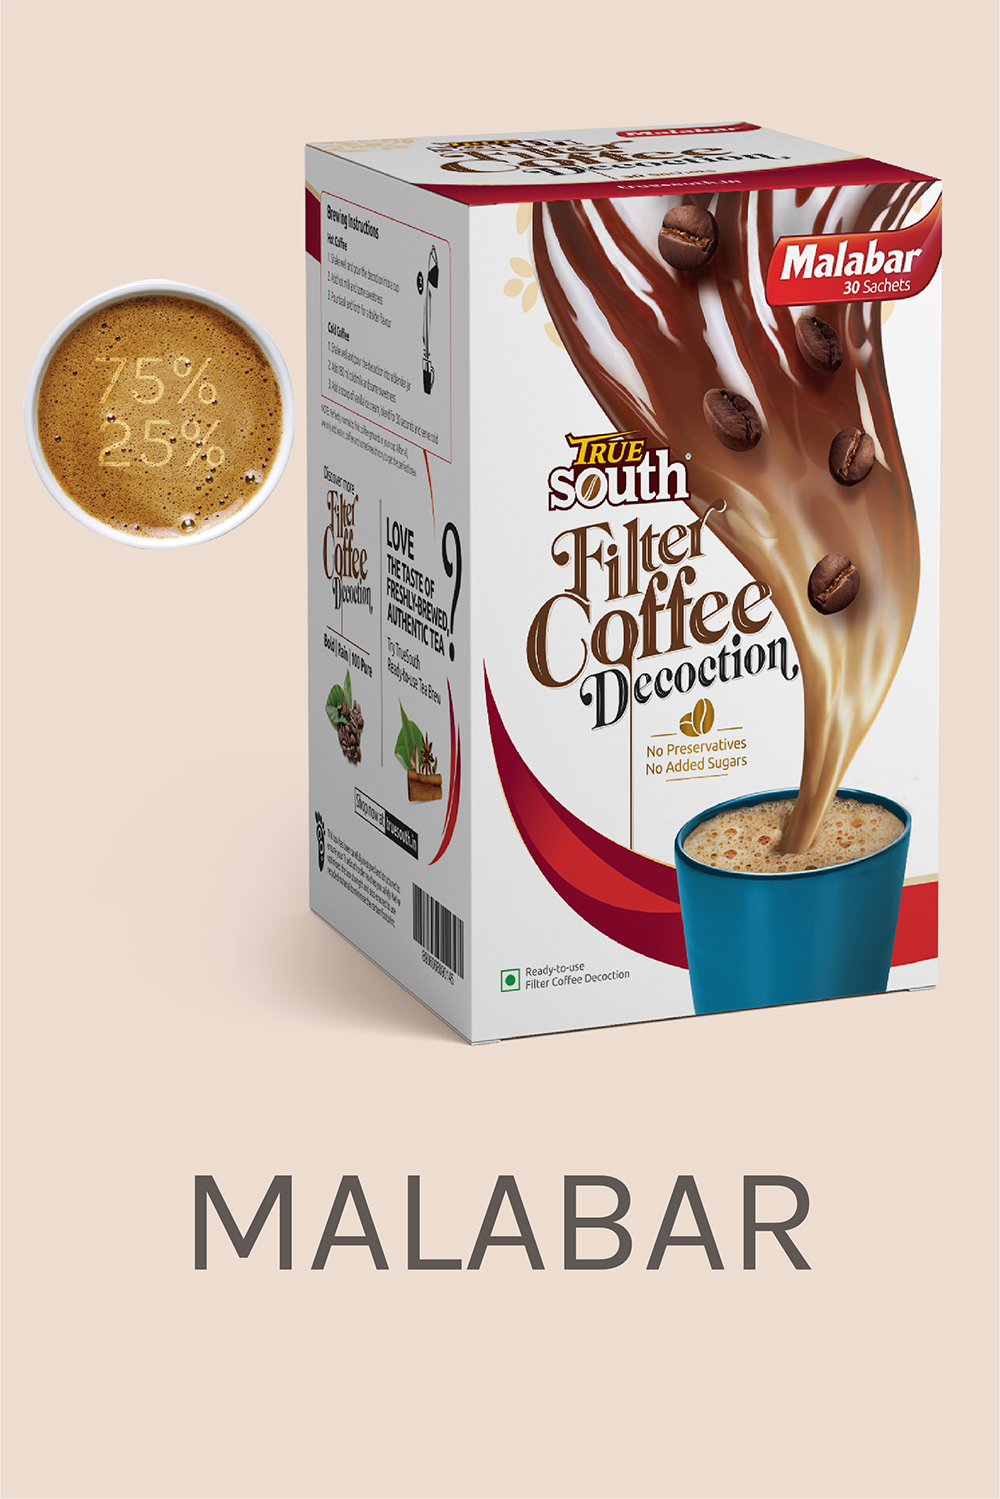 MALABAR Ready-to-use Filter Coffee Decoction Subscription